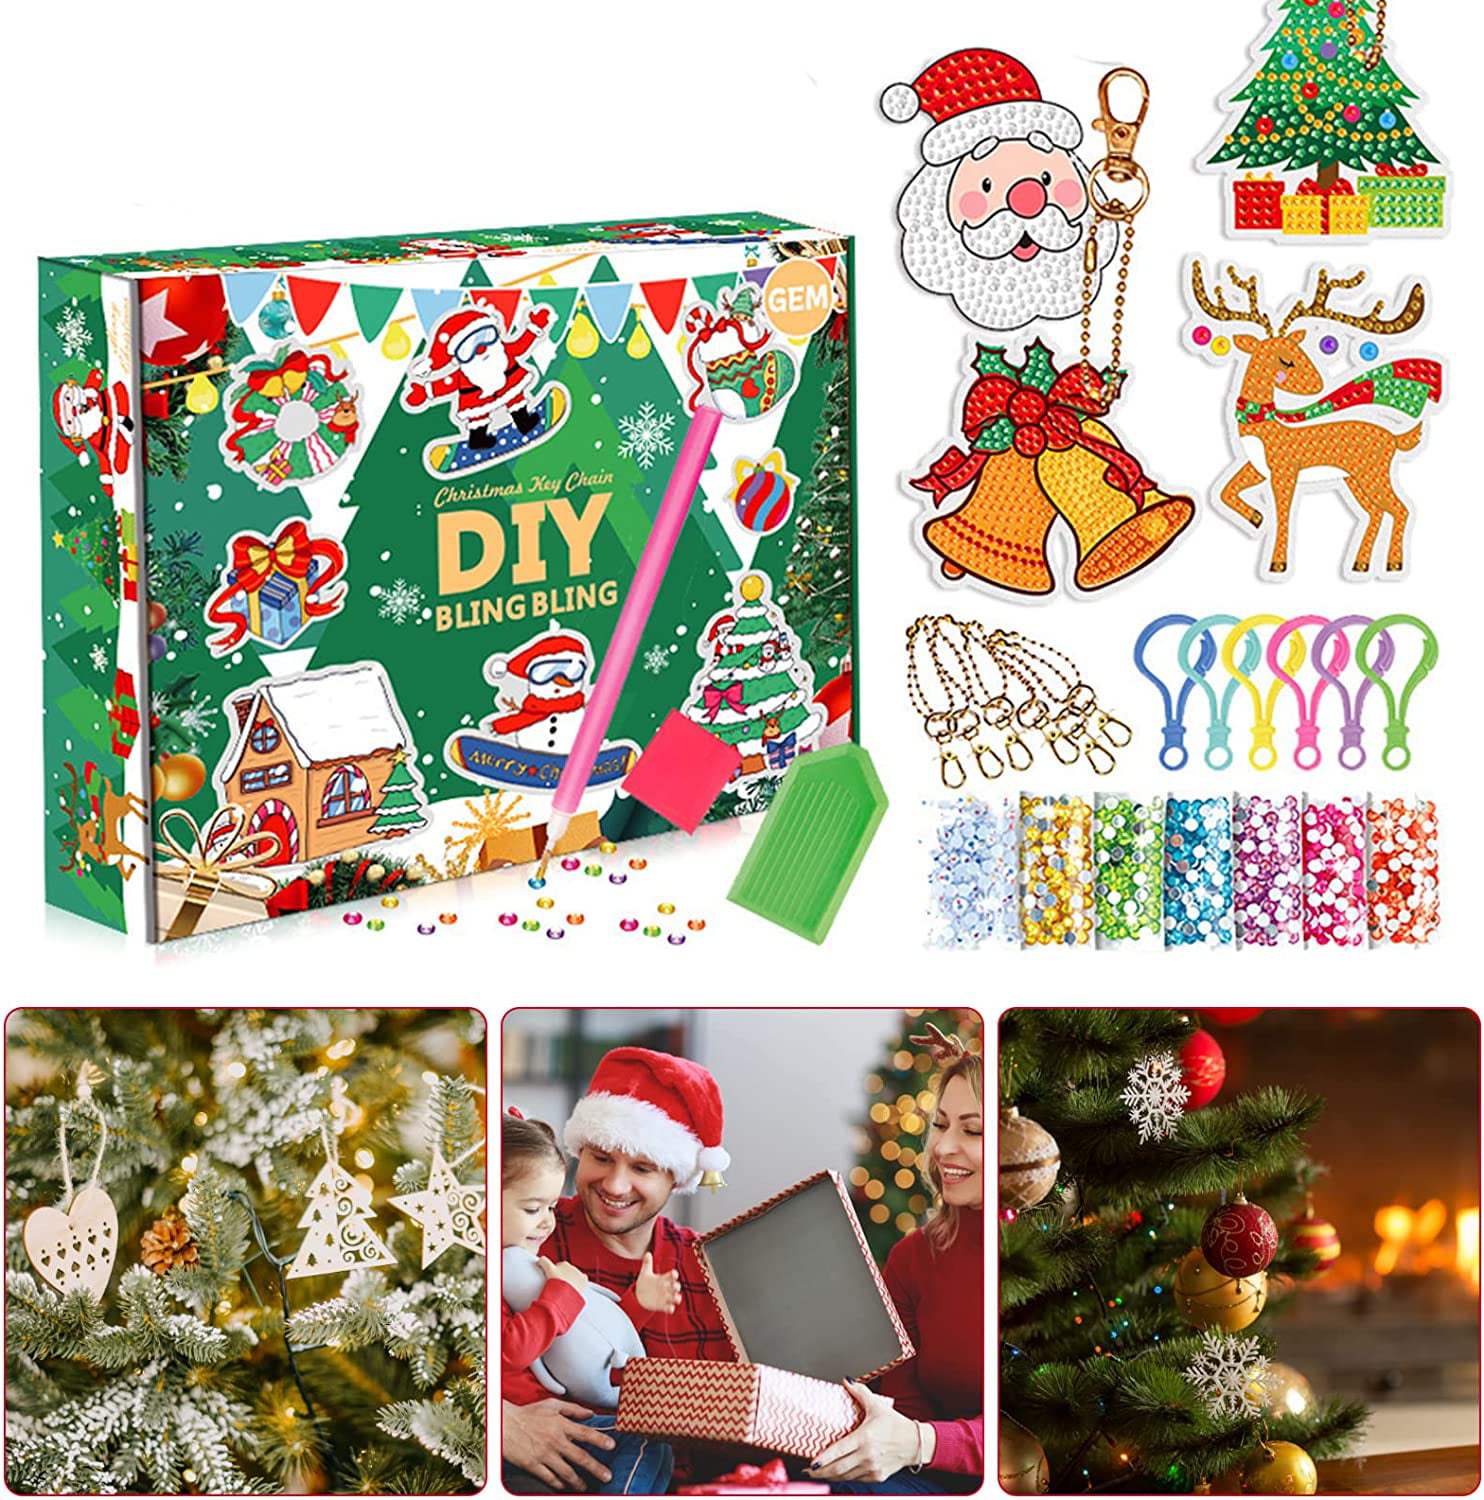 Christmas Diamond Painting Kits, Advent Calendar 2022 for Kids, 8pcs Make  Your Own Gem Keychains - Arts and Crafts for Girls - Paint by Number,  Christmas Gift Ideas for Girls Age 4-10 